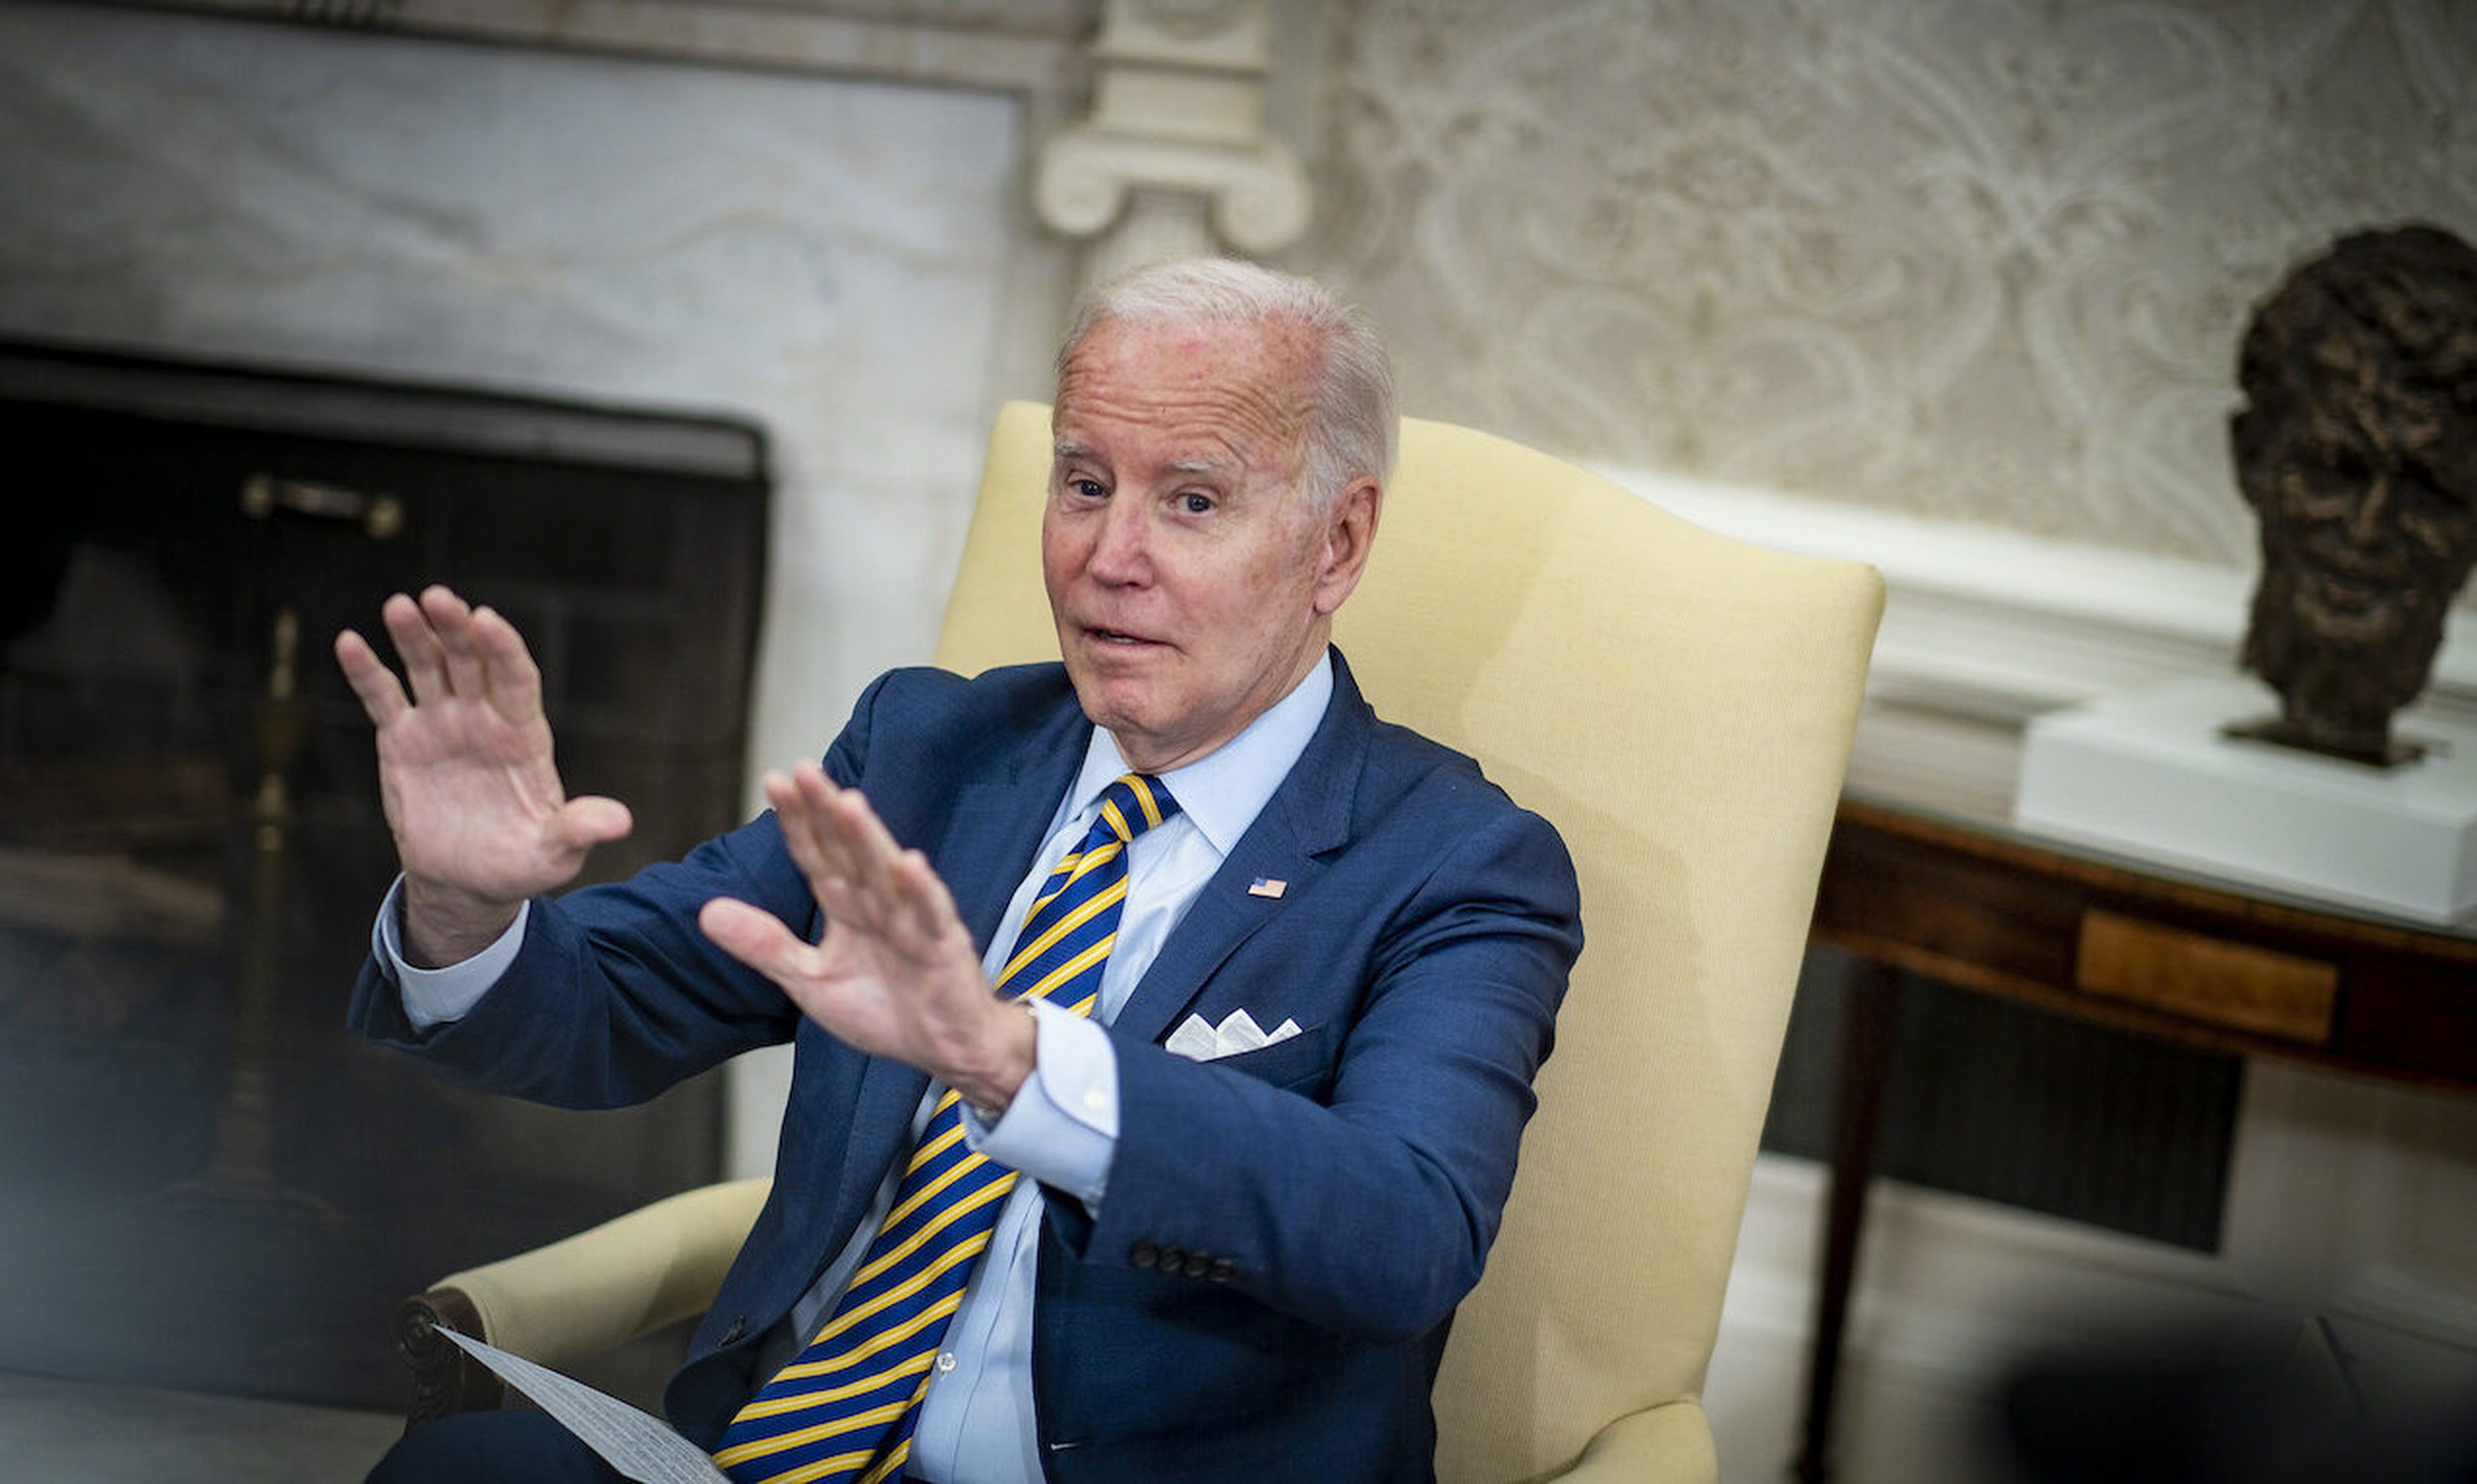 Today’s columnist, Stephen Kovac of Zscaler, offers four ways the industry can embrace the zero-trust goals set by the Biden administration and make our cloud apps more secure. (Photo by Pete Marovich-Pool/Getty Images)